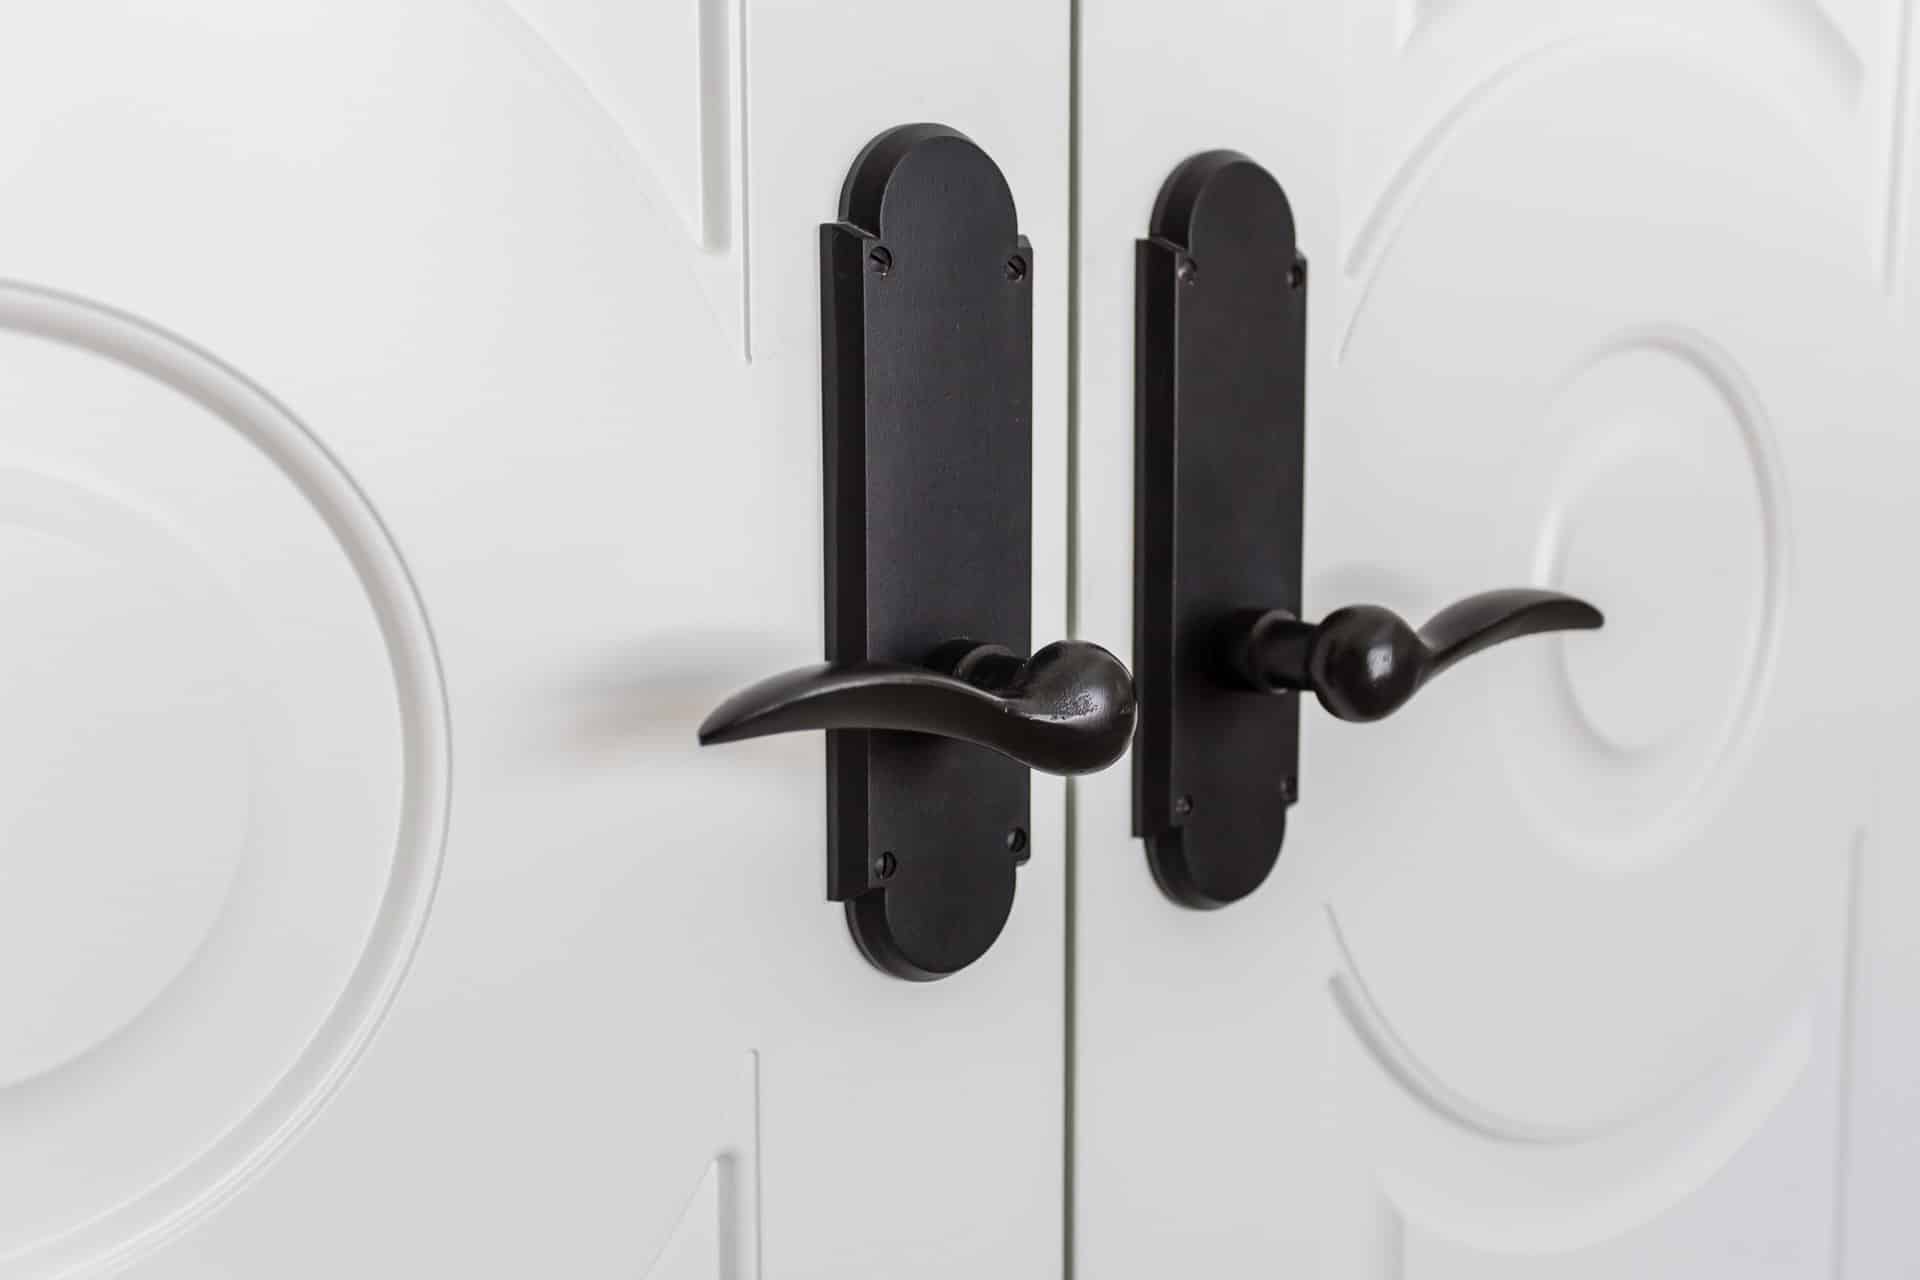 Doors Knobs vs. Levers: Which Should You Choose? - Riverside